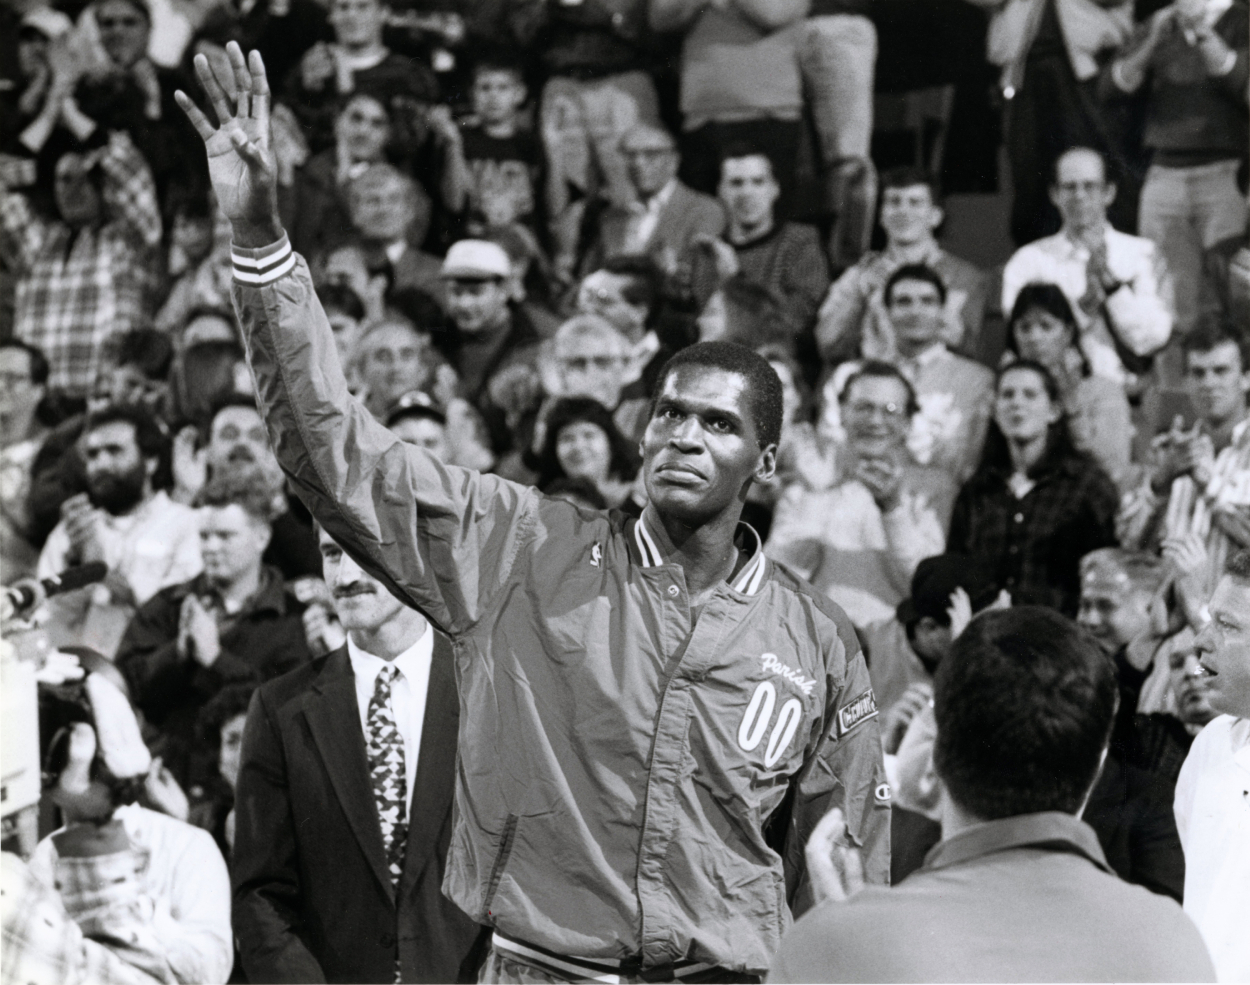 Charlotte Hornets center Robert Parish waves to the crowd at the Boston Garden in 1994.